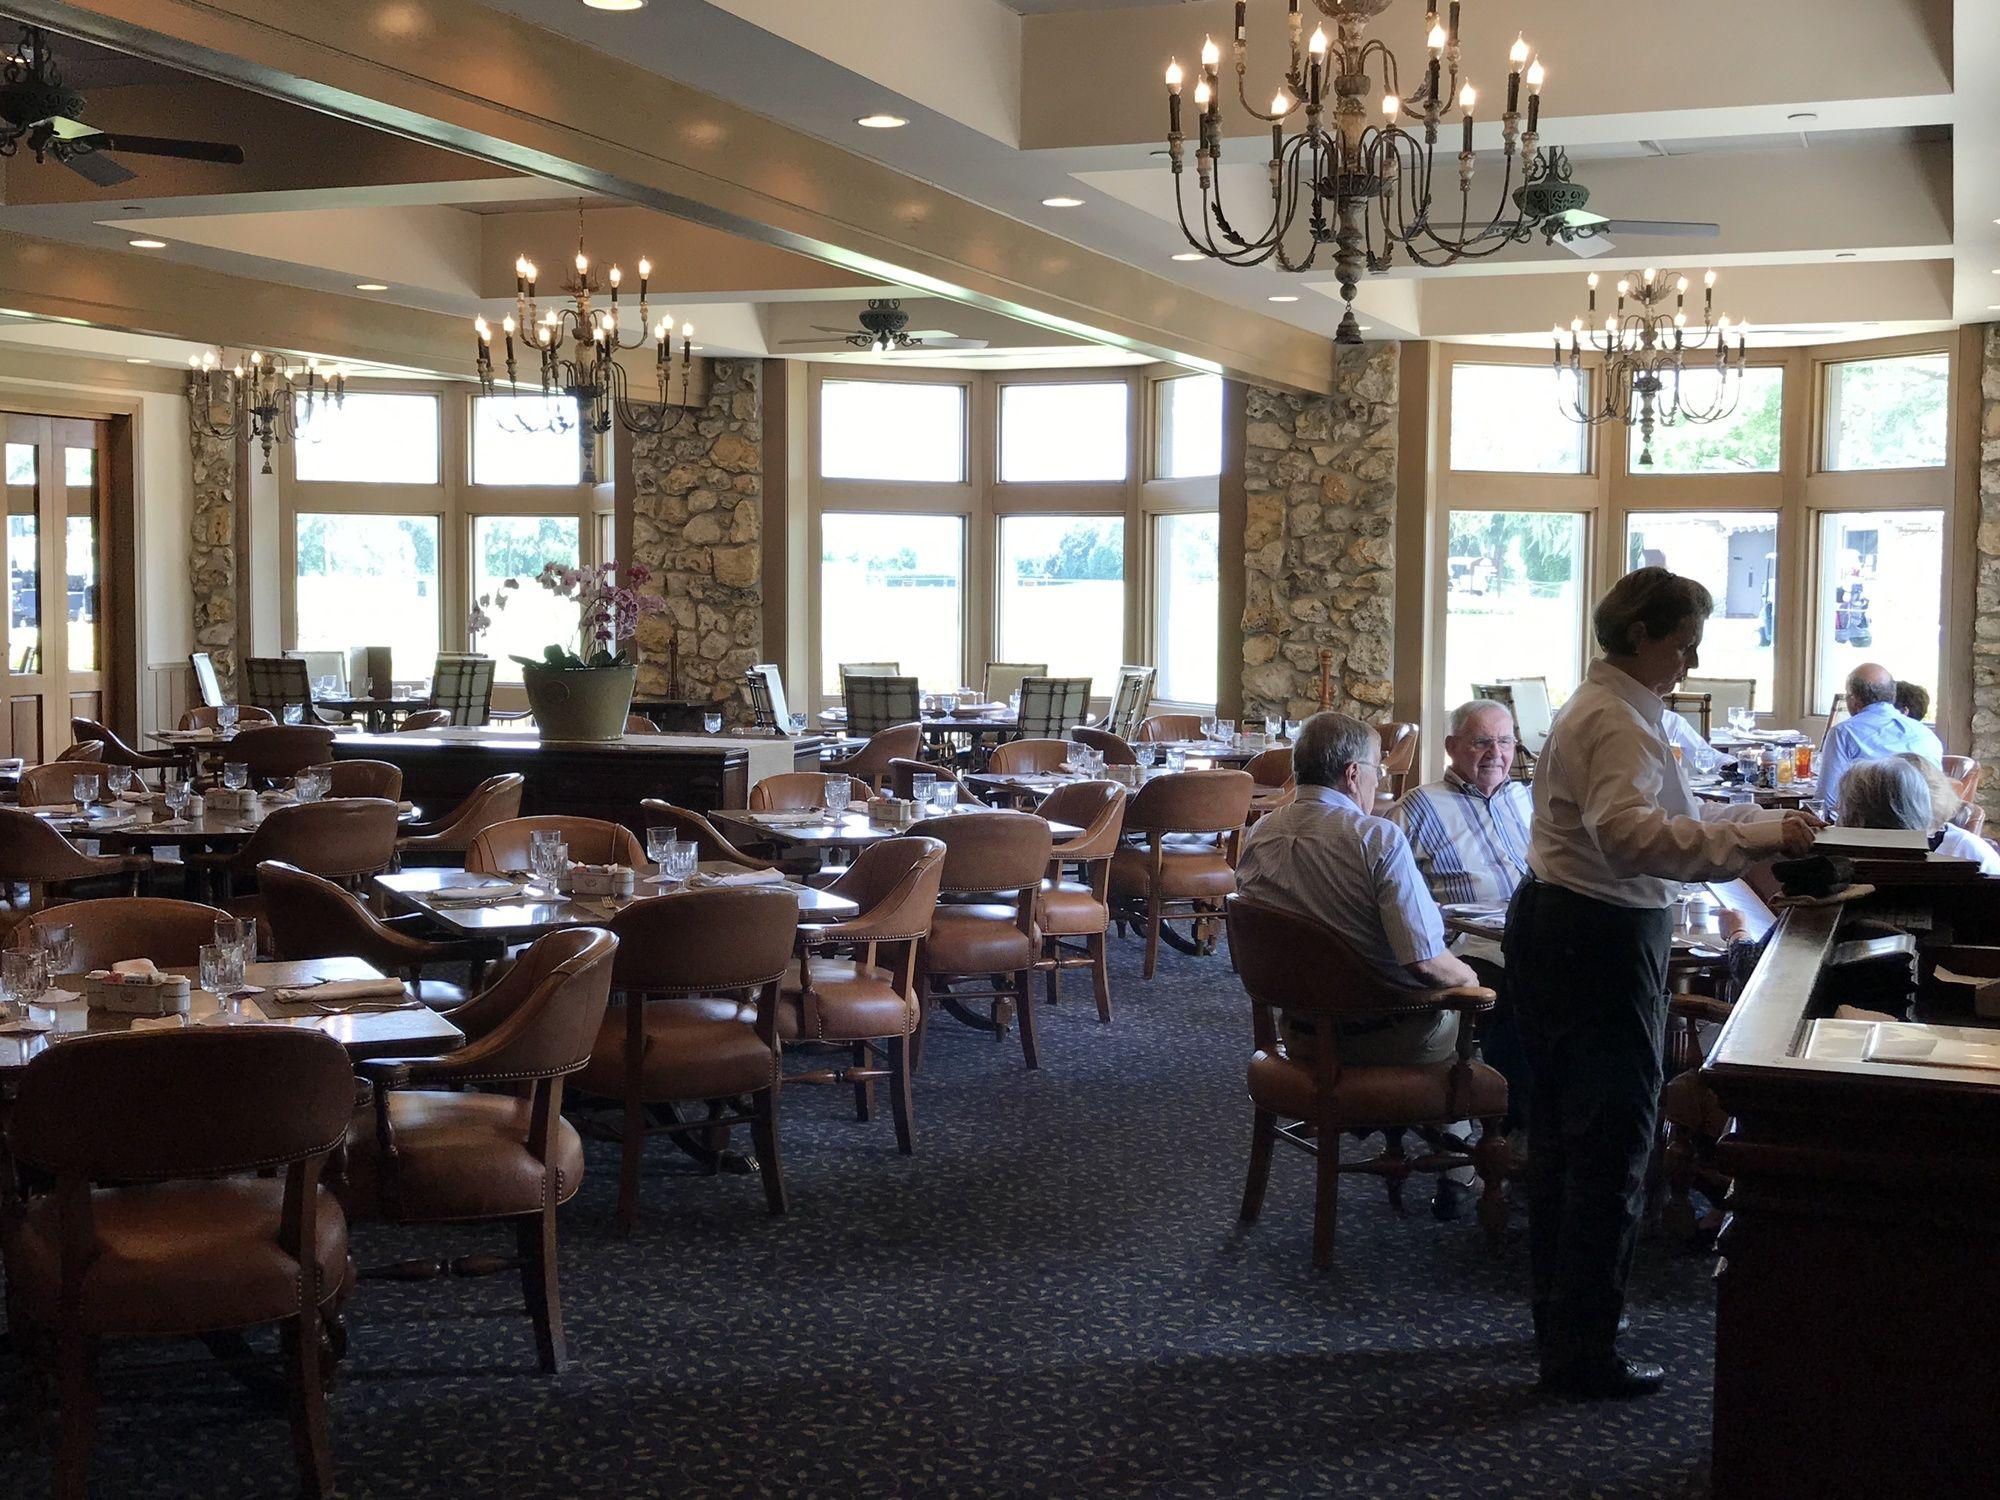 Restaurant Arnold Palmer's Bay Hill Club and Lodge